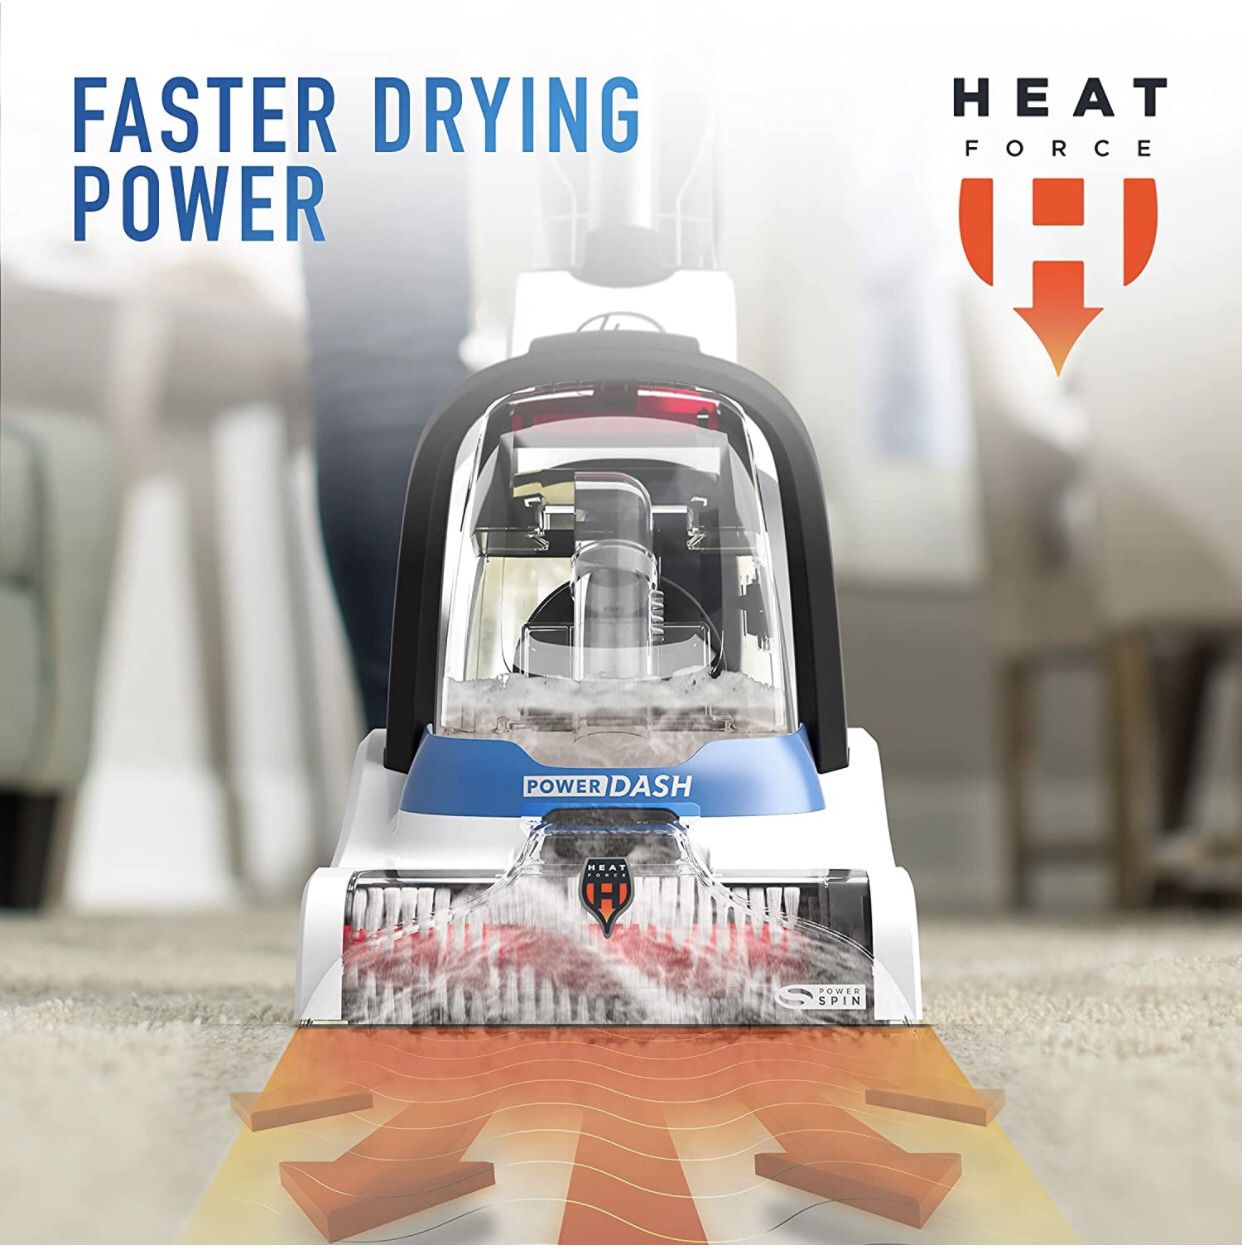 NEW! Hoover PowerDash Pet Compact Carpet Cleaner, Lightweight, FH50700, Blue